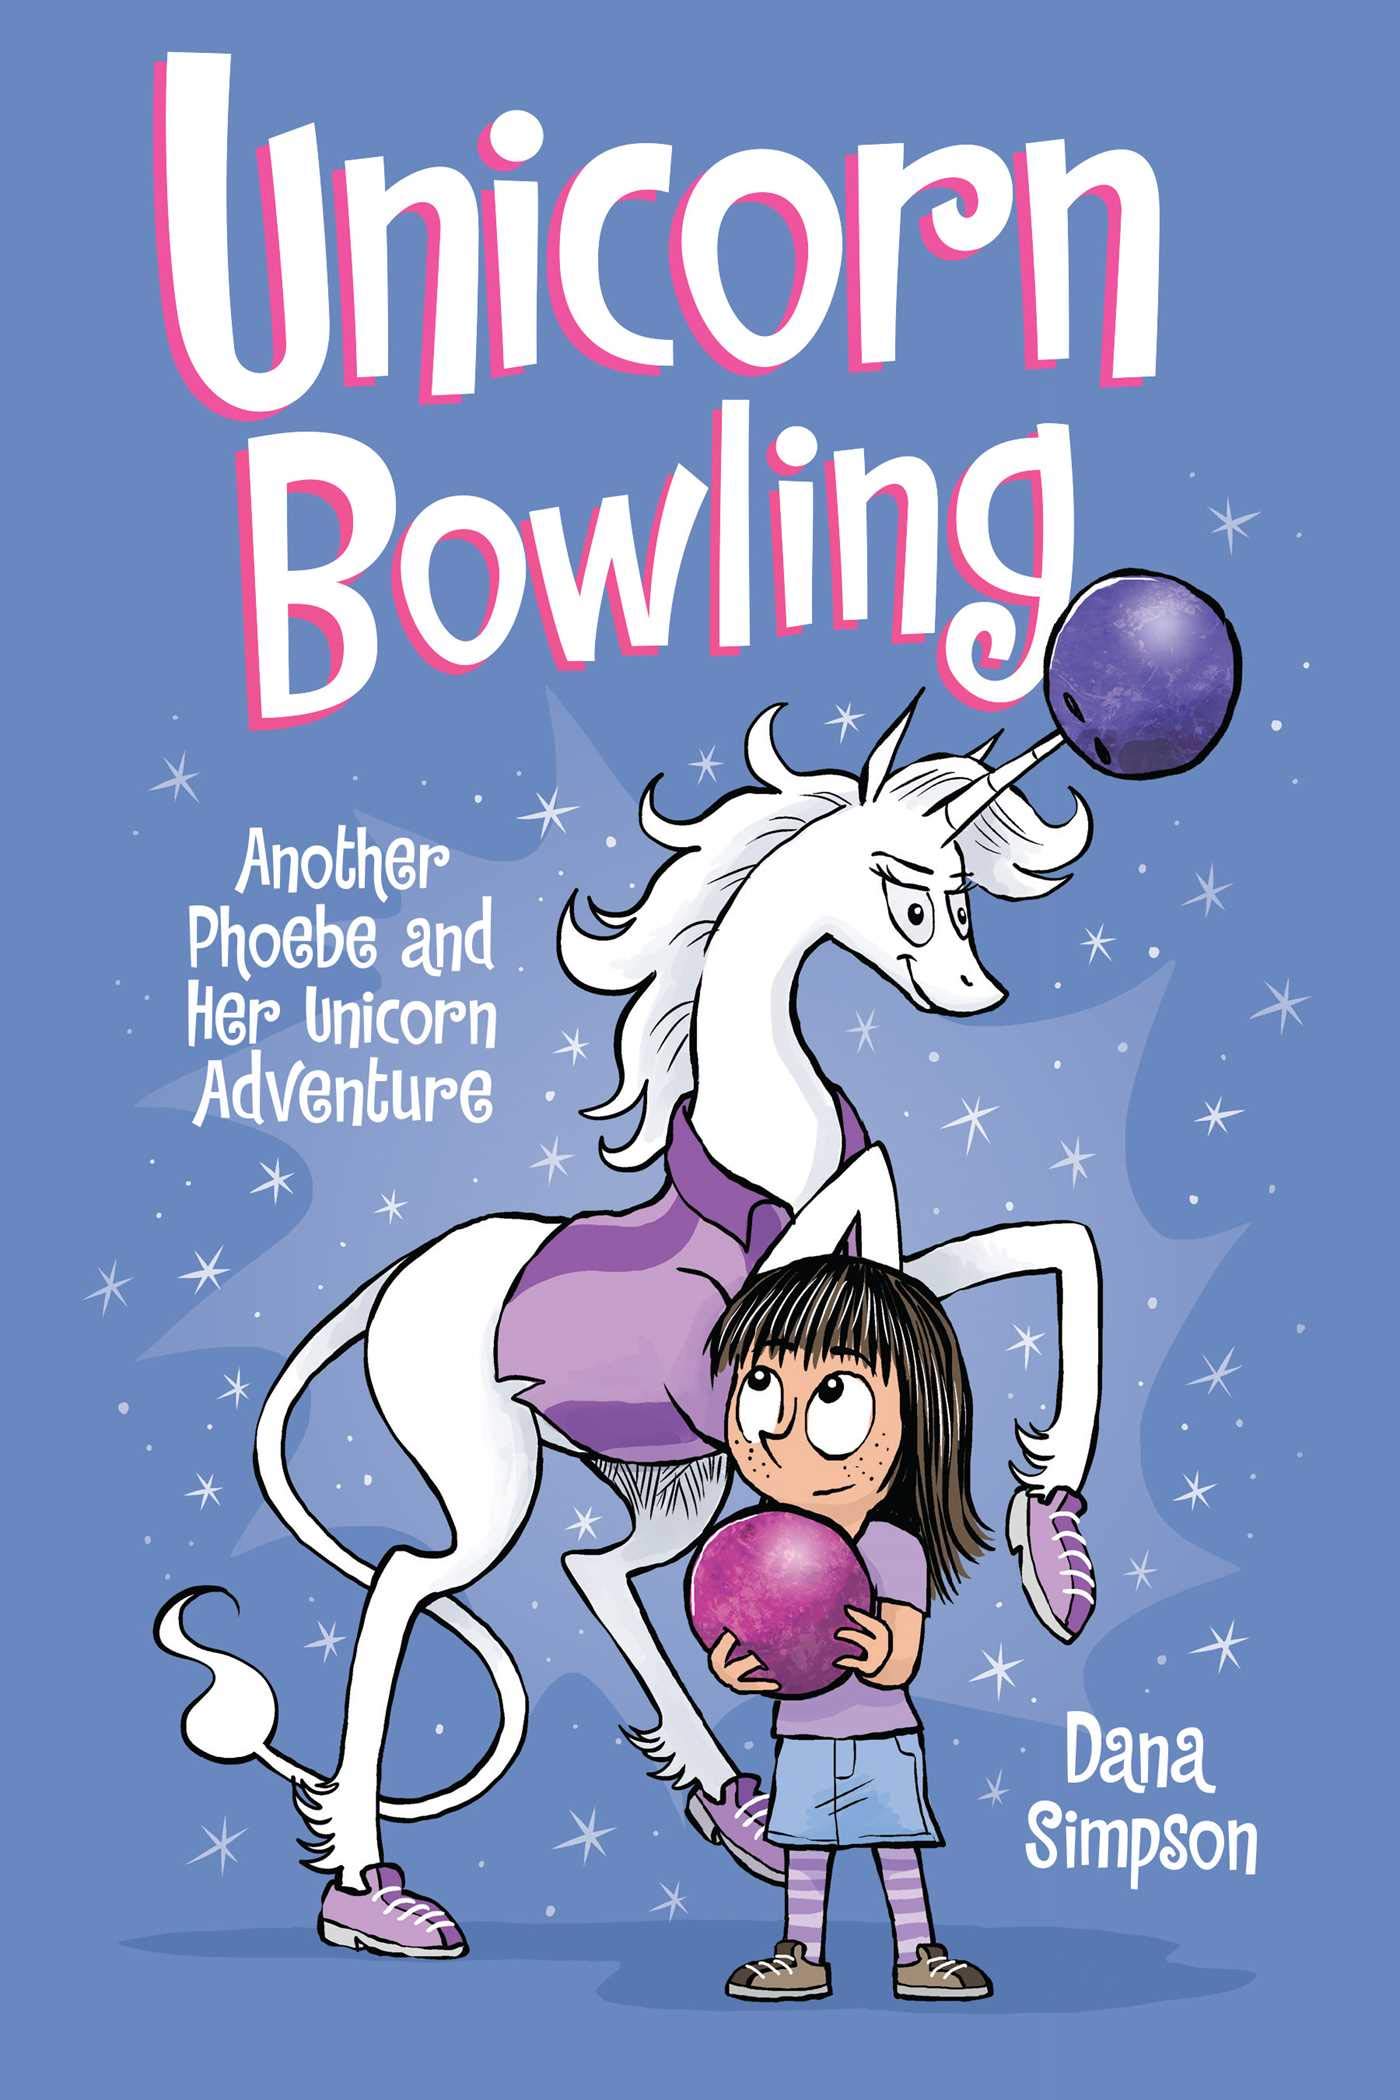 Unicorn Bowling : Another Phoebe and Her Unicorn Adventure (Phoebe and her Unicorn) [Paperback]